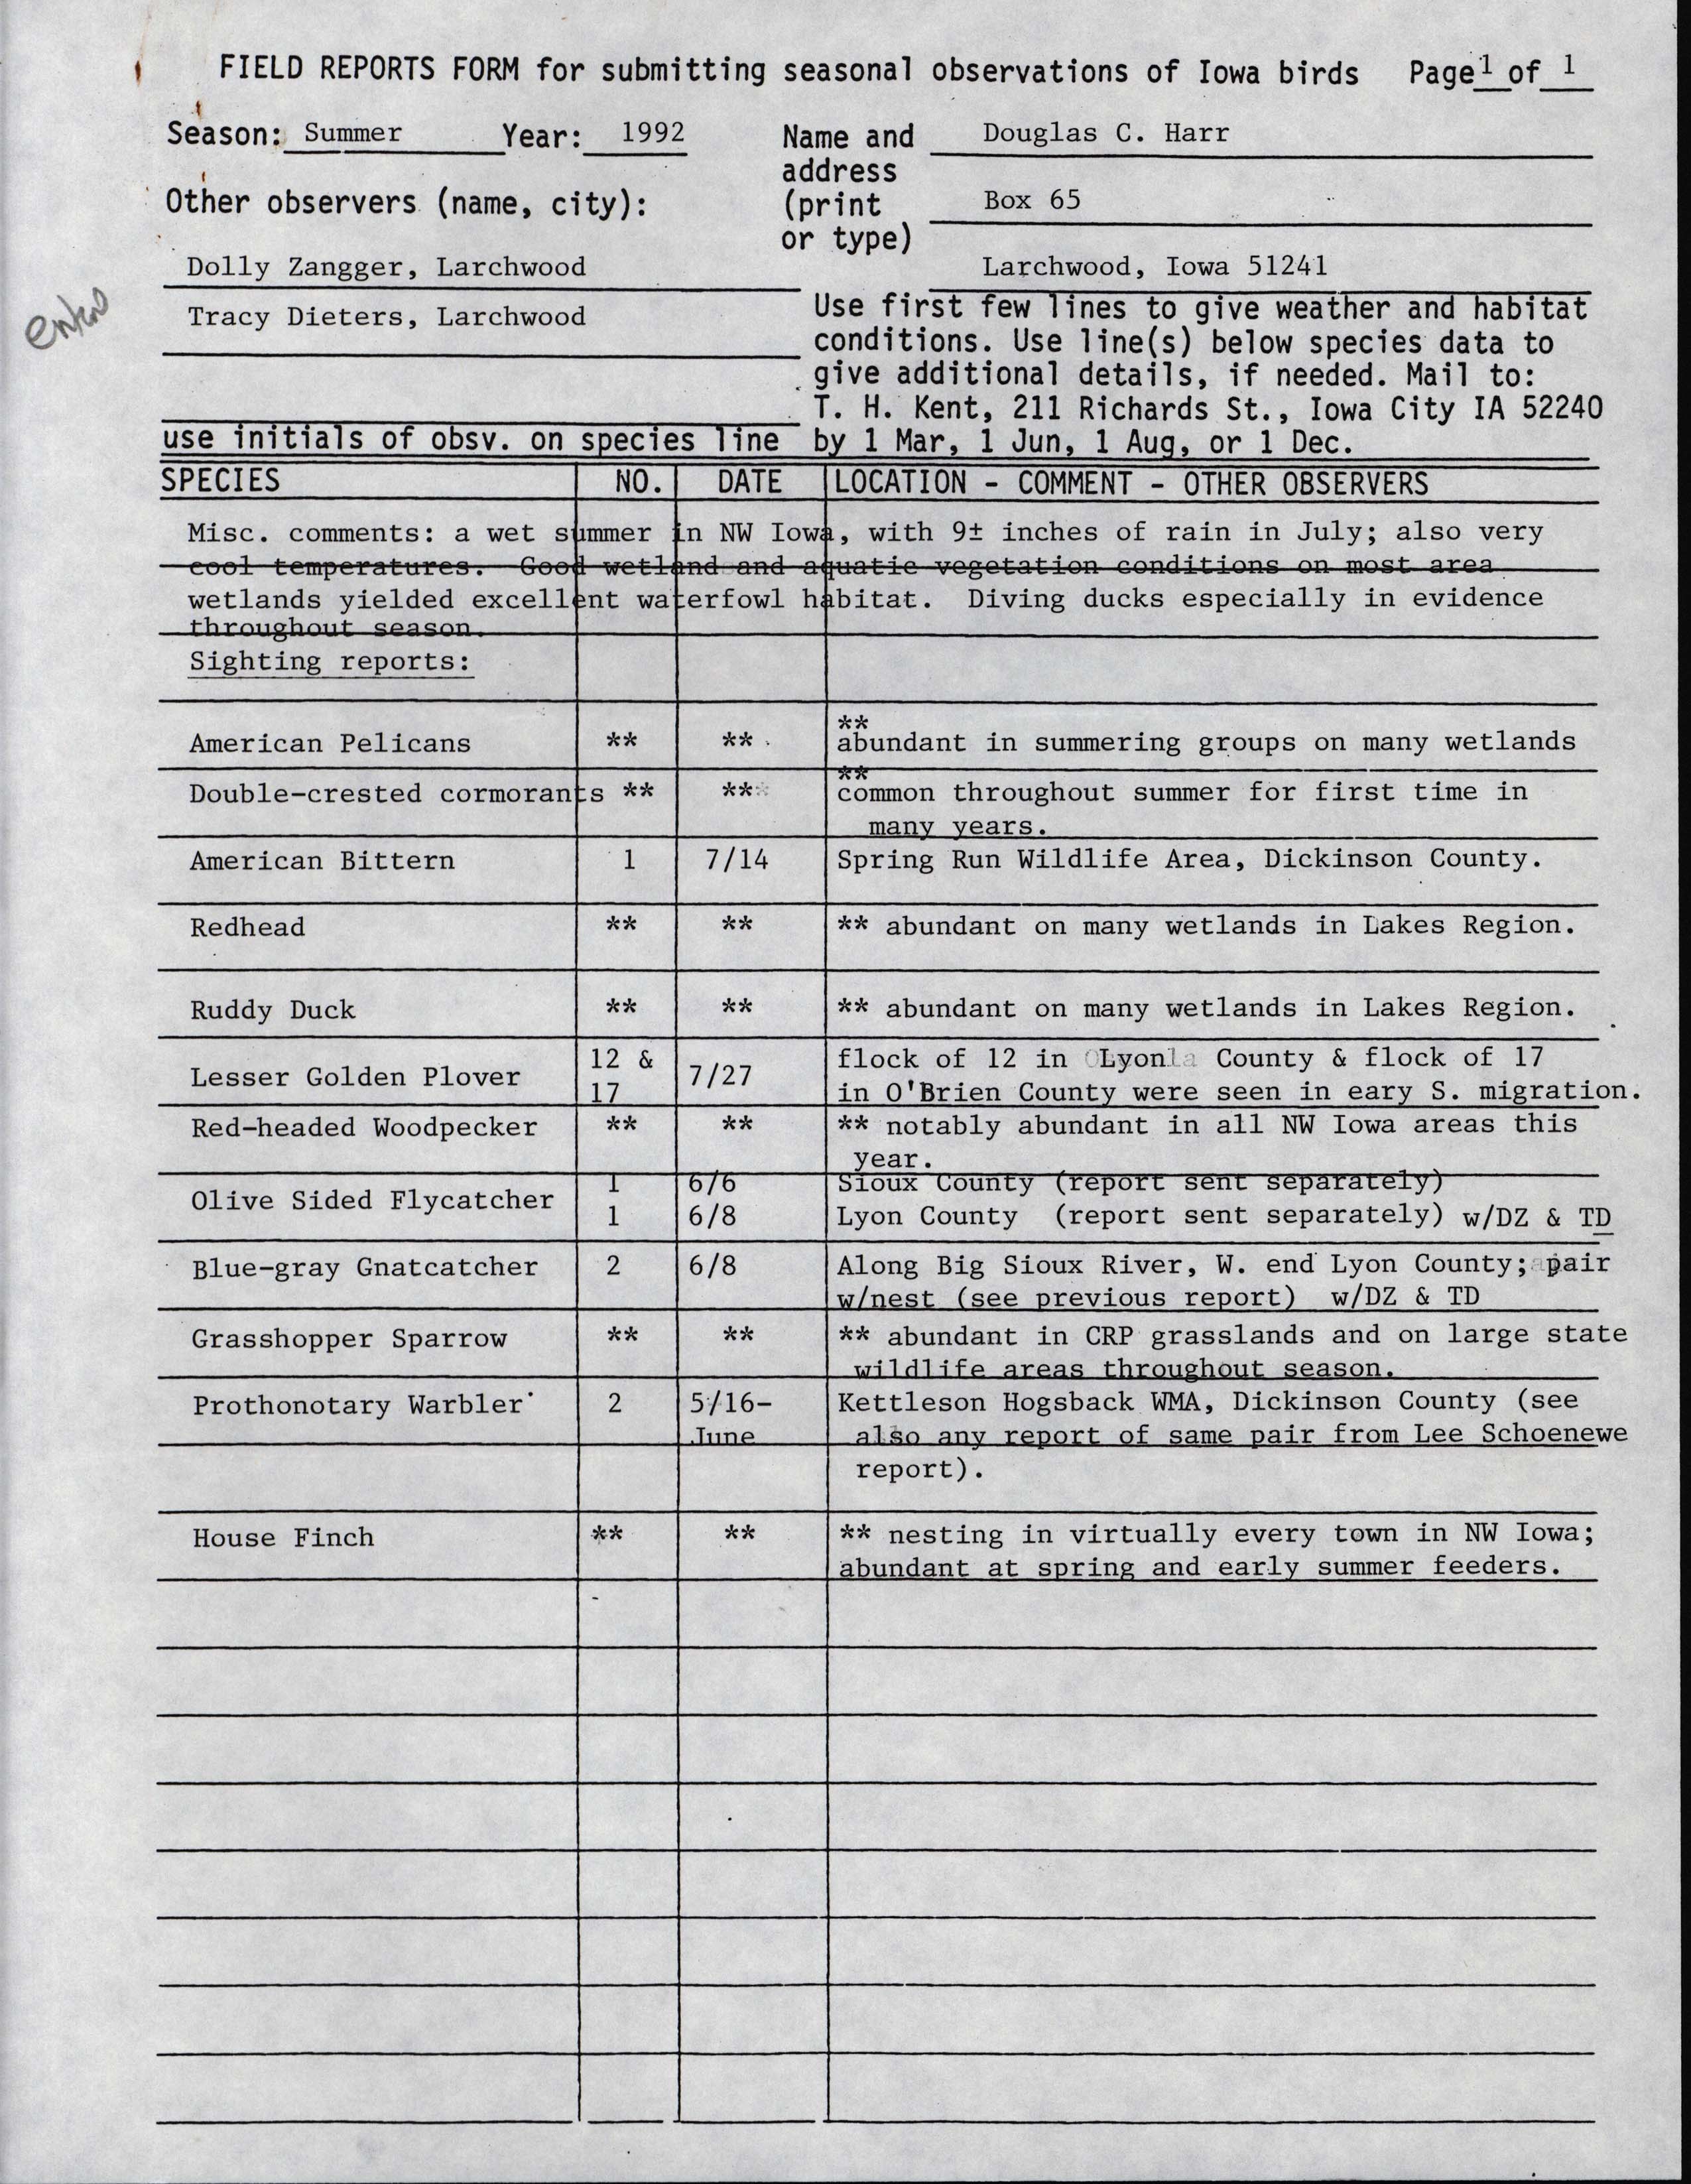 Field reports form for submitting seasonal observations of Iowa birds and letter to James J. Dinsmore contributed by Douglas C. Harr, July 31, 1992